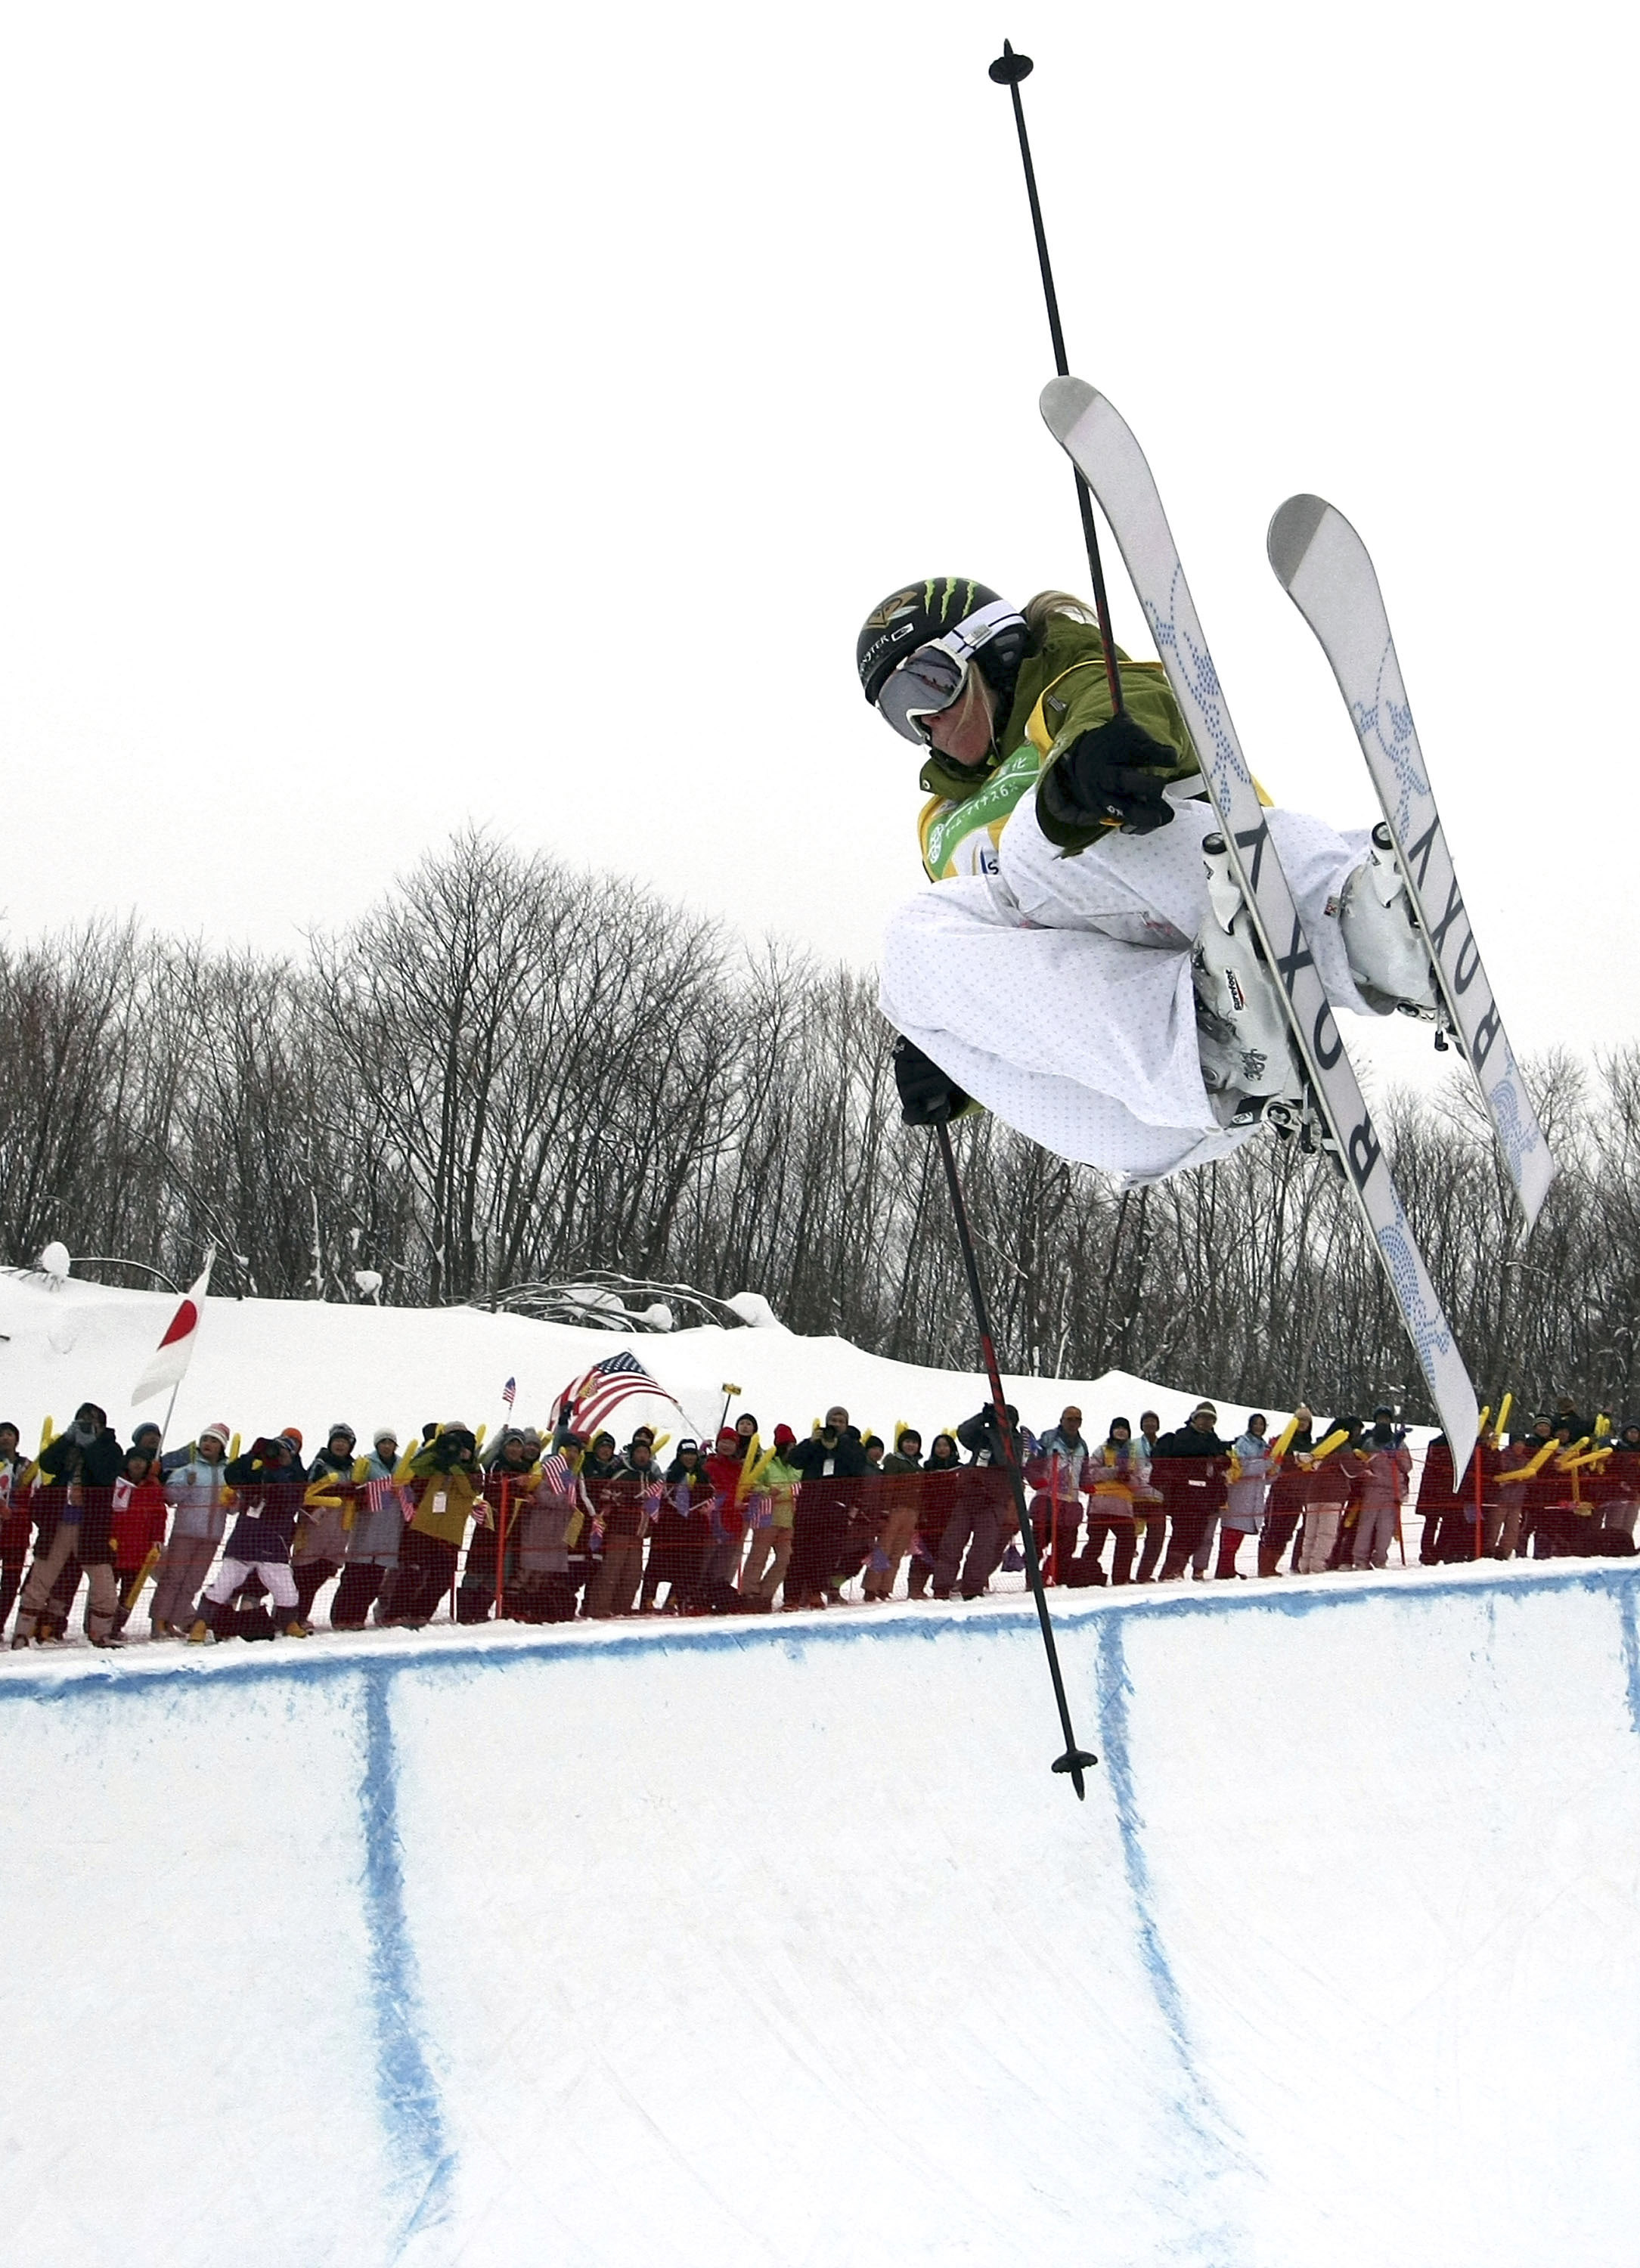 INAWASHIRO, JAPAN - FEBRUARY 15:  Sarah Burke of Canada competes during the Ladies' Halfpipe Final of 2008 Freestyle FIS World Cup in Inawashiro poses at Alts Bandai on February 15, 2008 in Inawashiro, Fukushima, Japan.  (Photo by Junko Kimura/Getty Image